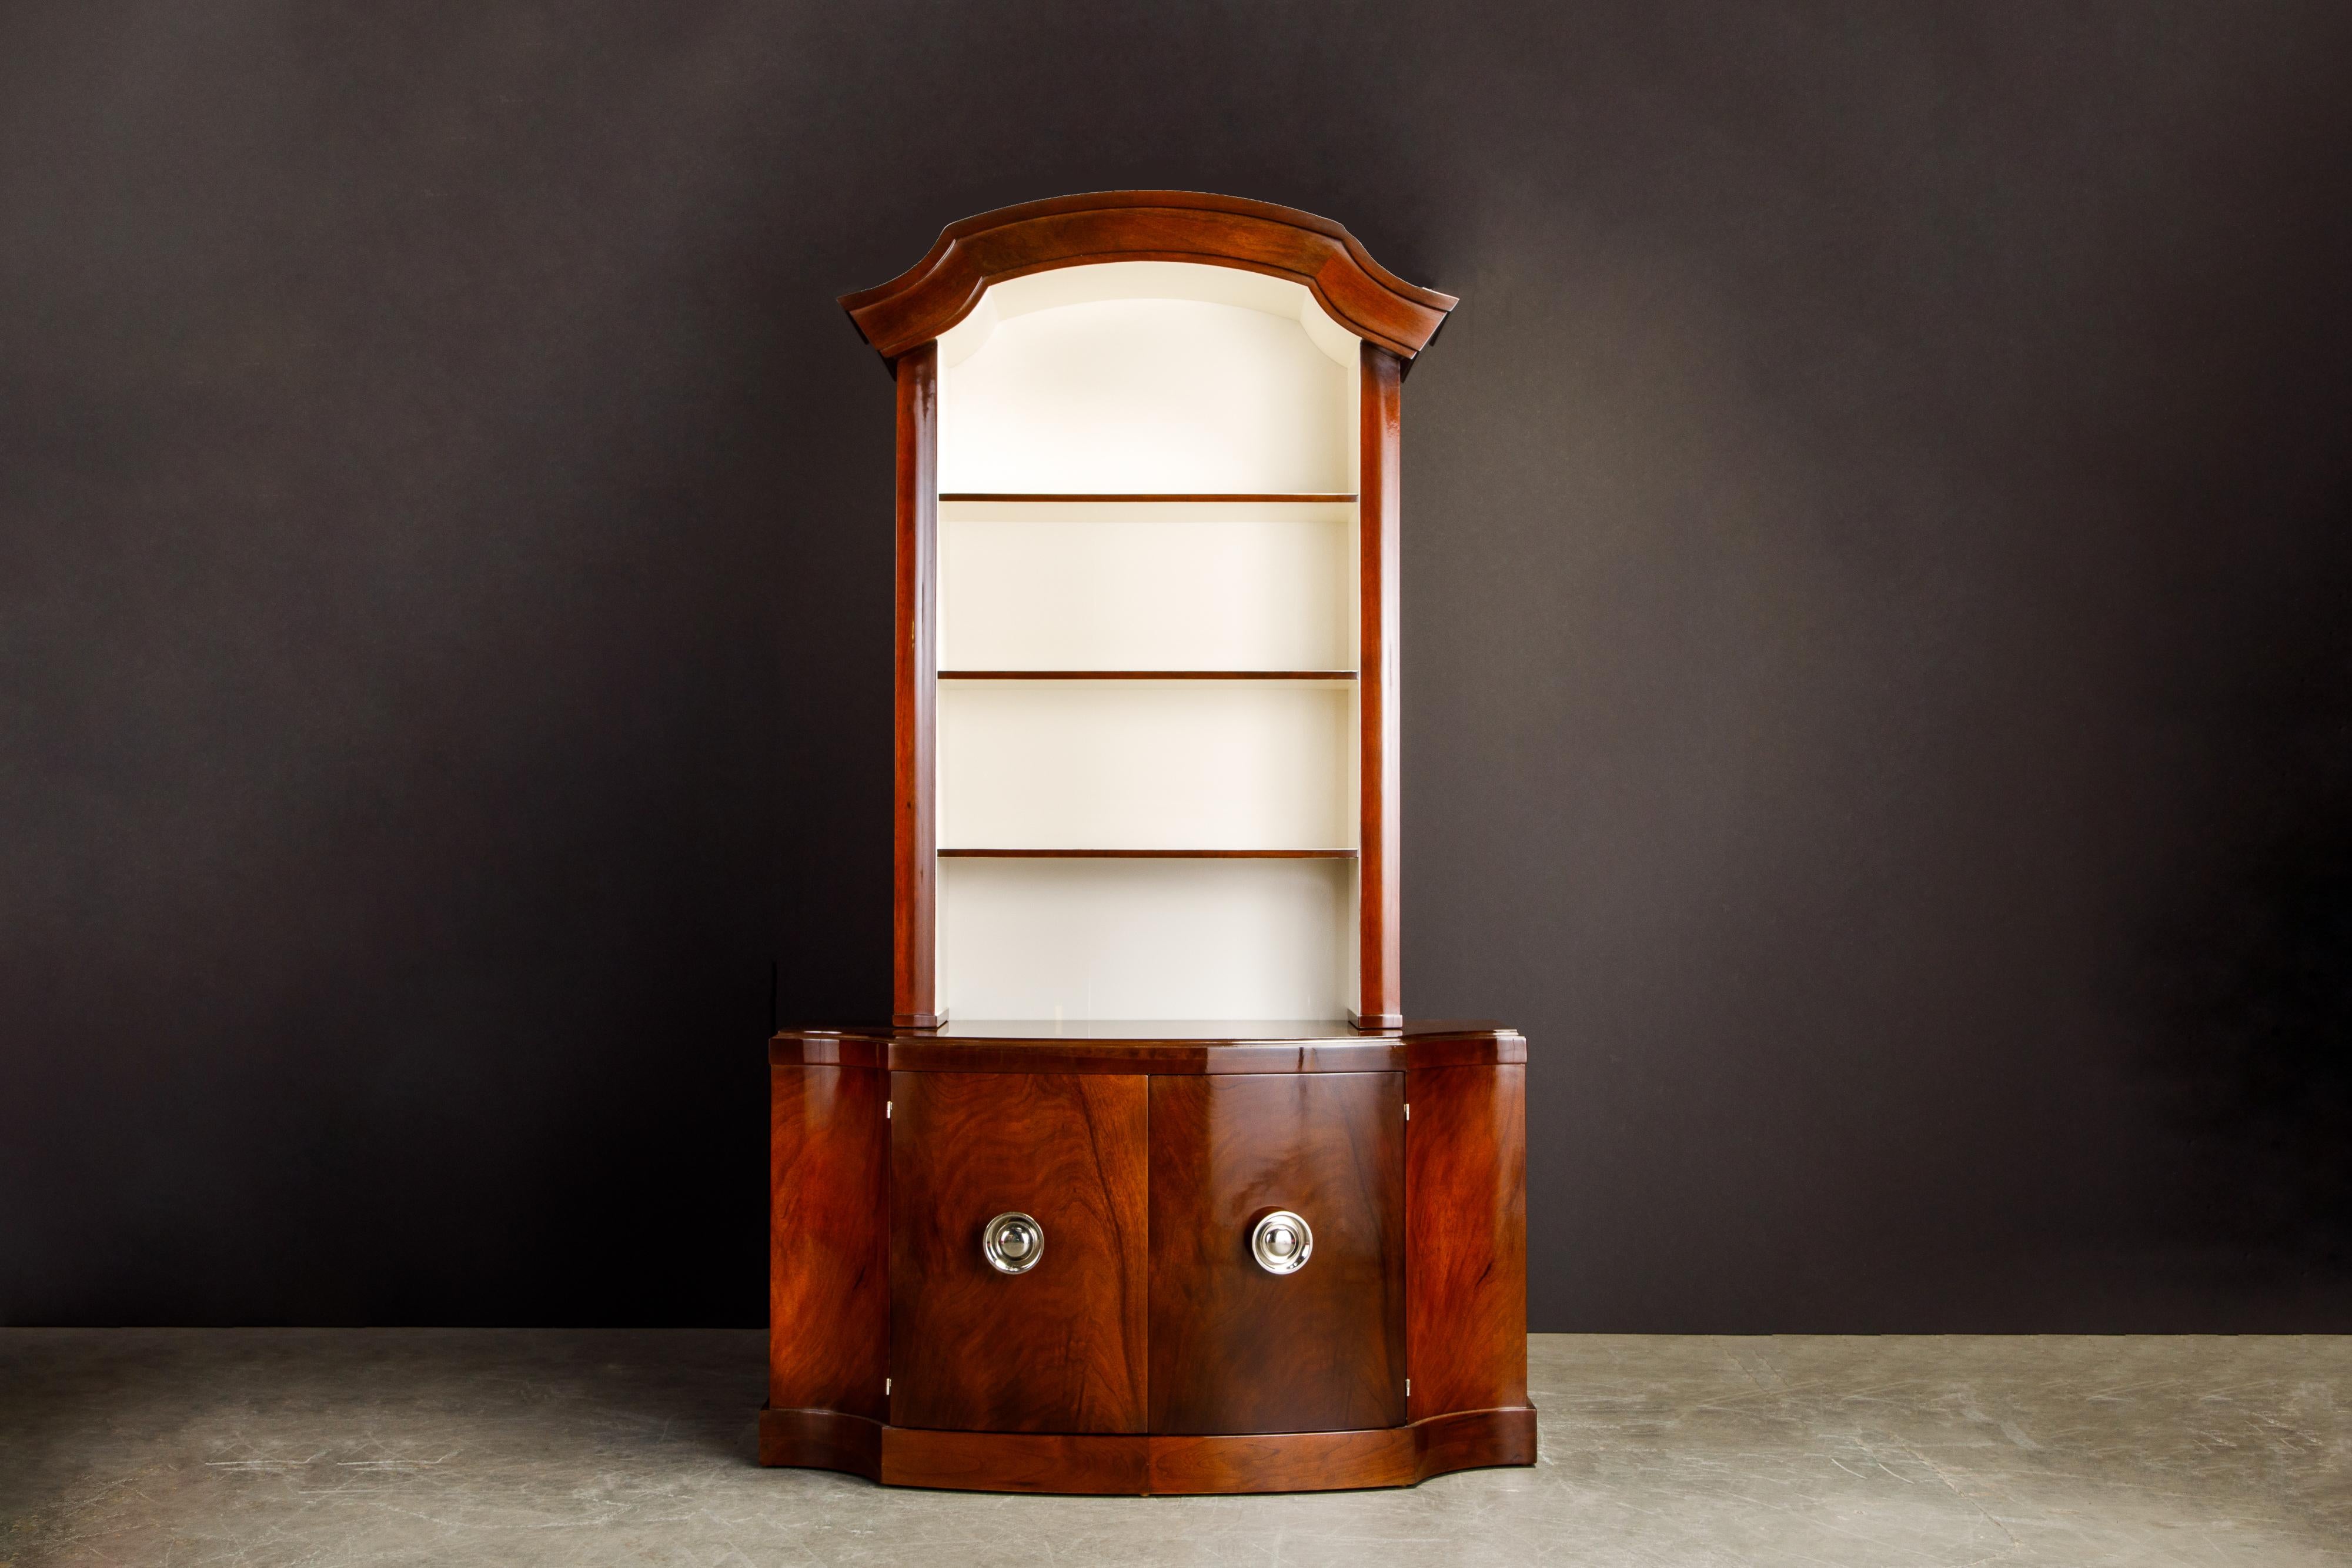 This fantastic 1940s breakfront cabinet was designed by Paul Frankl for Johnson Furniture and retailed by John Stuart. Crafted from Mahogany and newly refinished in a beautiful French Polish which is the highest costing and most laborious finish you